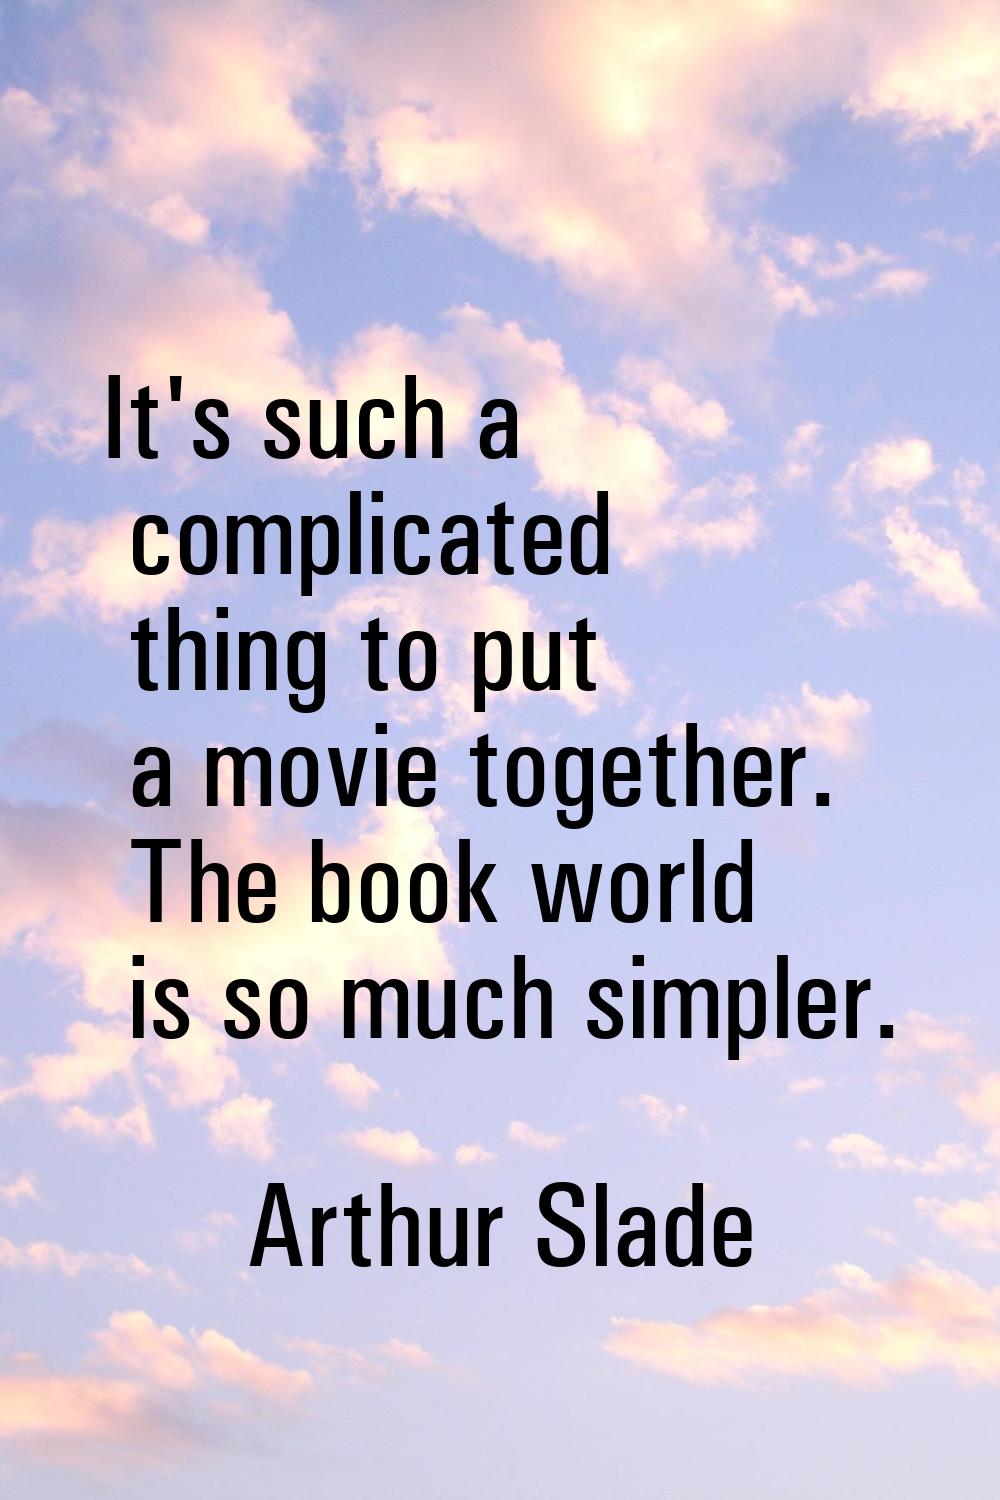 It's such a complicated thing to put a movie together. The book world is so much simpler.